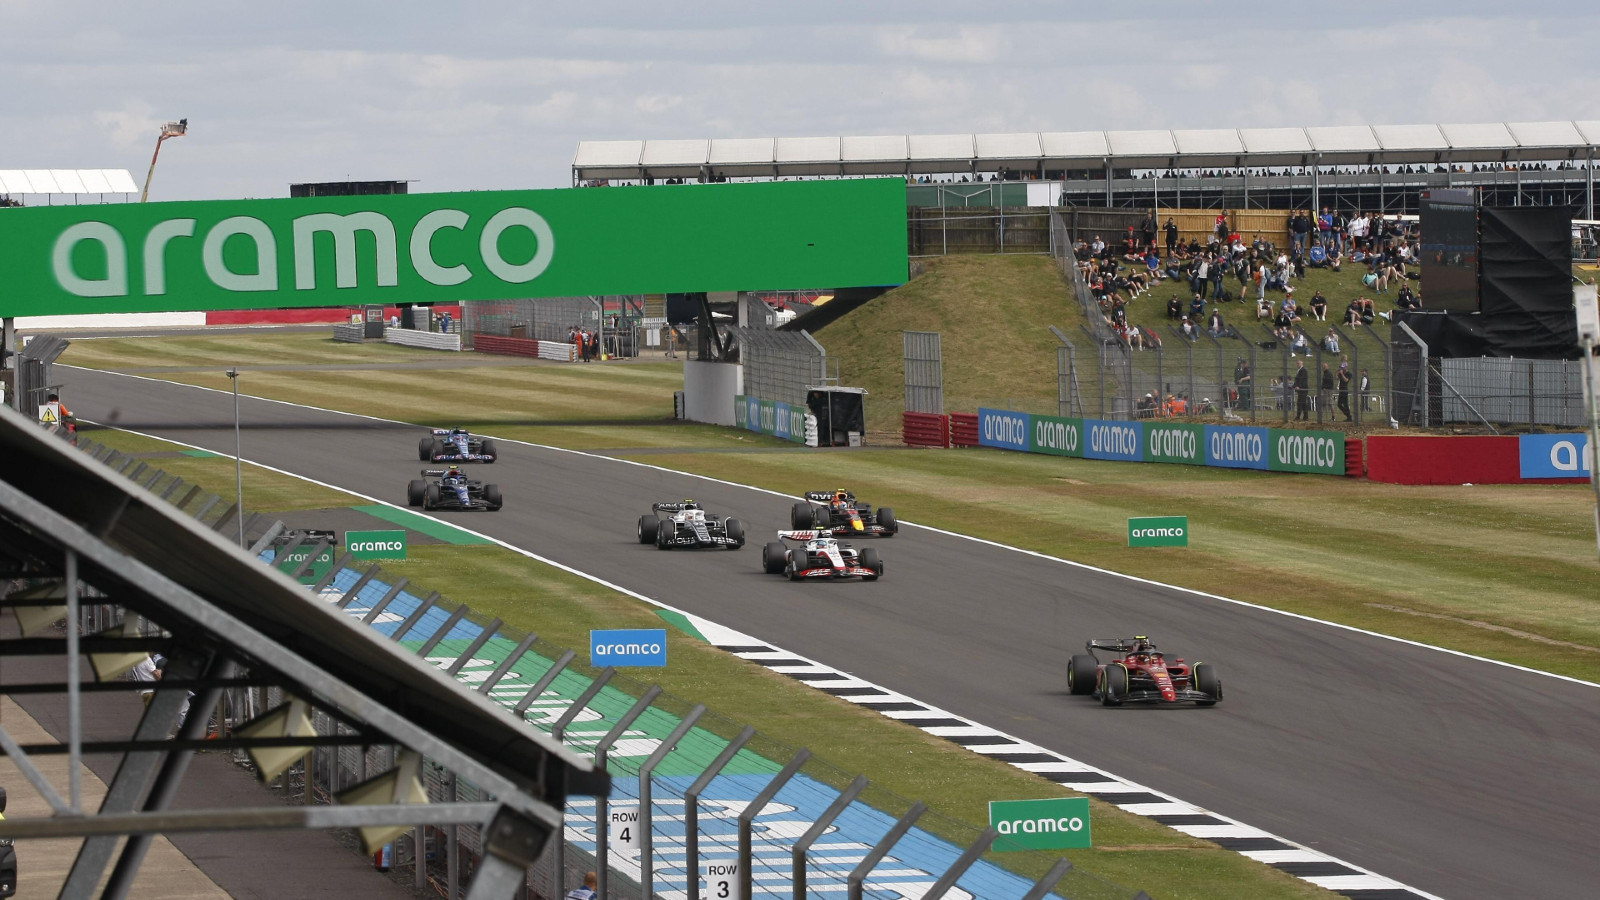 Action at the 2022 British Grand Prix. Silverstone, F1 points July 2022.